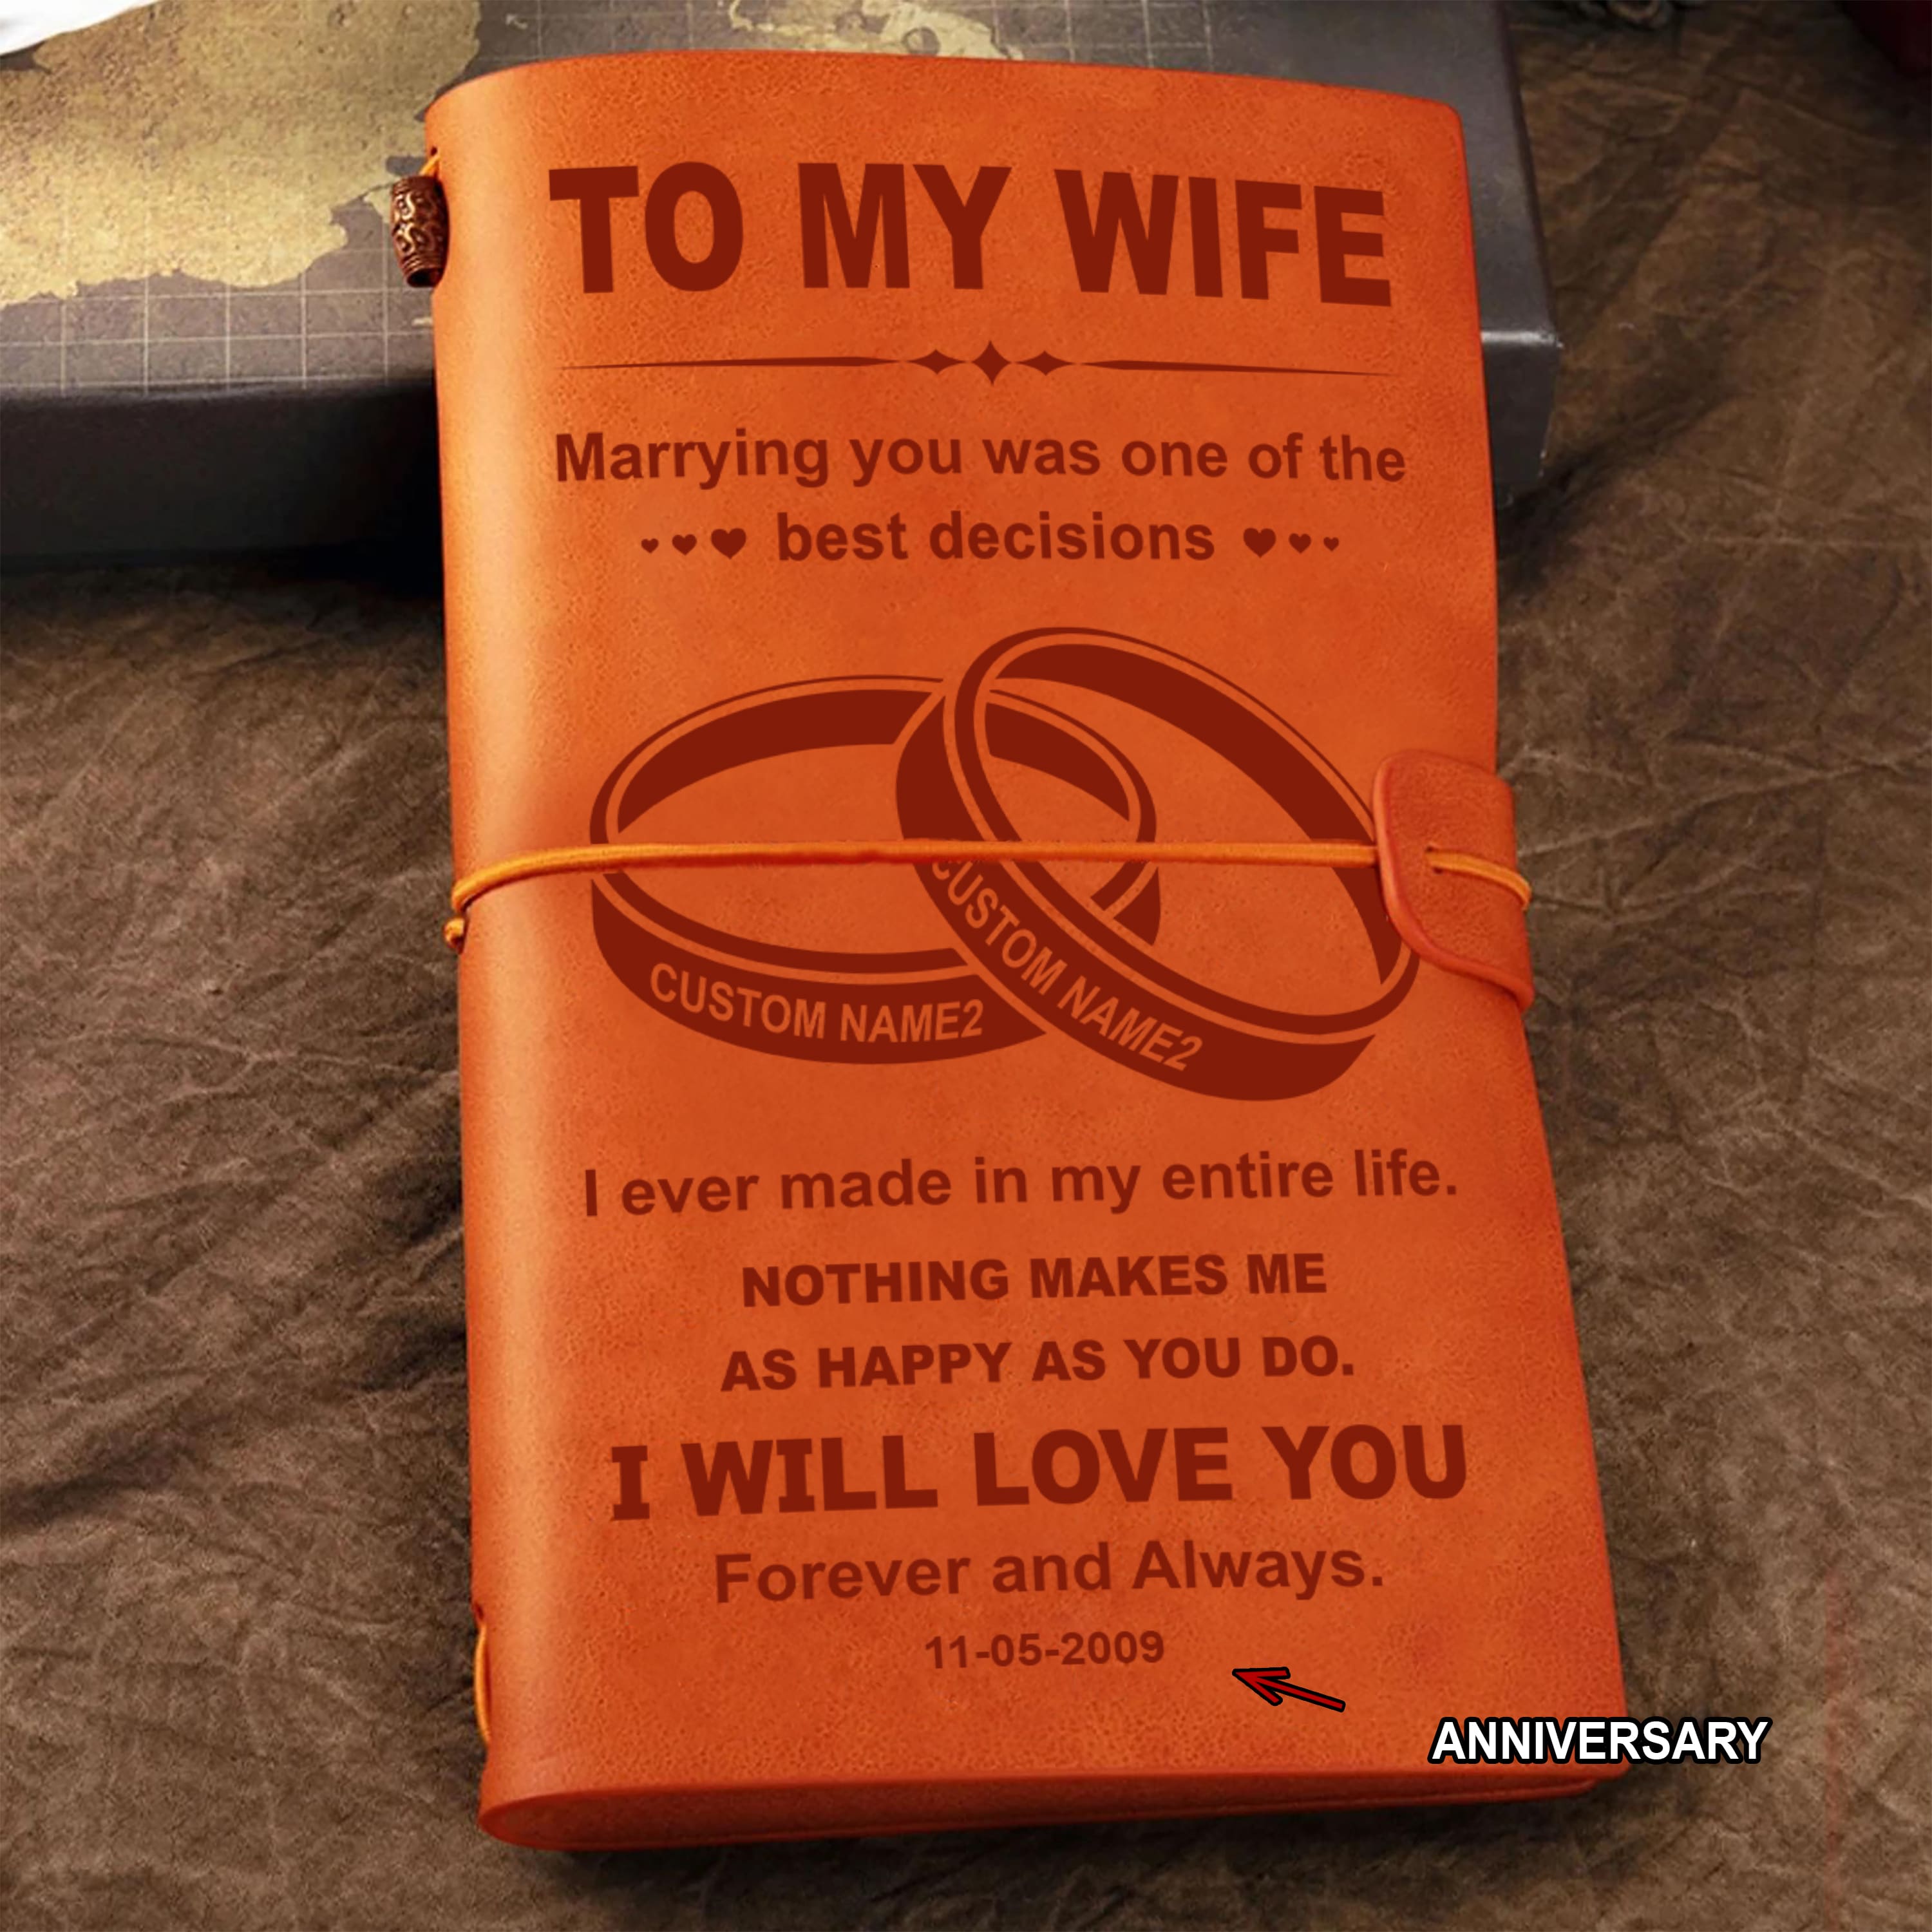 Valentines gifts-Vintage Journal Husband to wife- Marrying you was one of the best decision I ever made